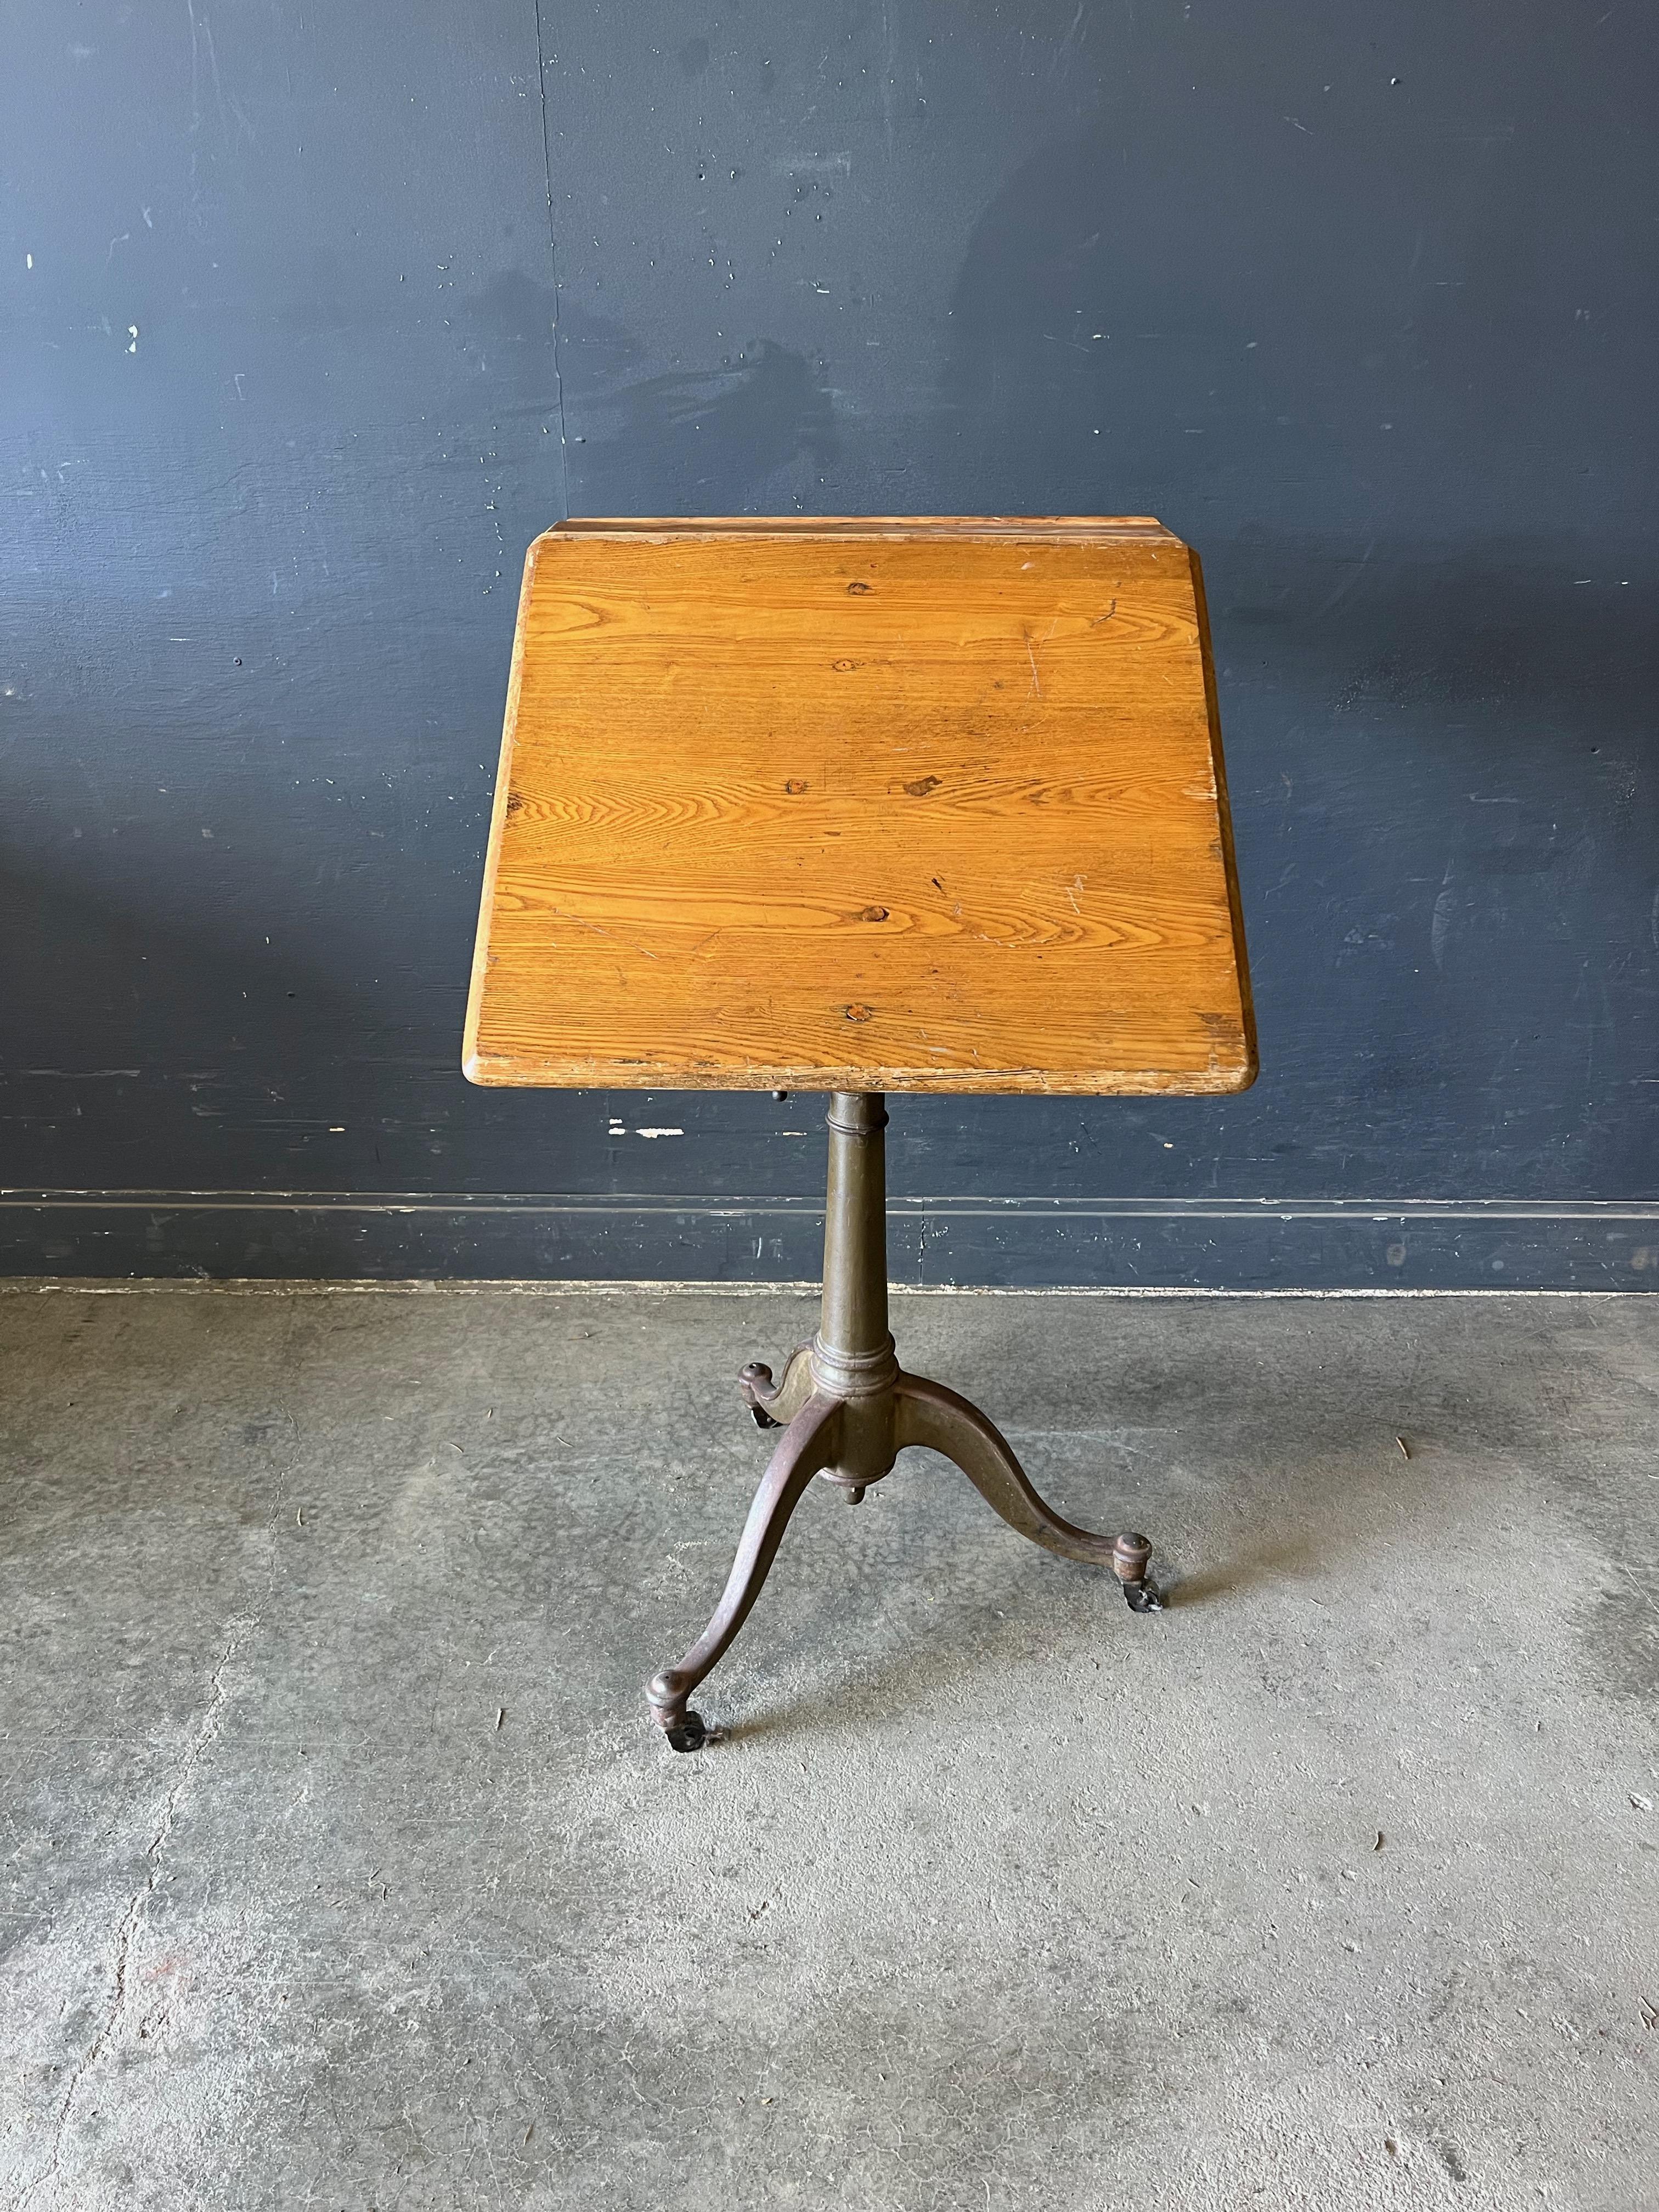 Industrial Vintage Adjustable c 1930 Cast Iron Drafting Table, nice early drafting table with original makers mark stamped on underside, adjustable from 30-42 inches. Table can be in a number of positions with two sets of adjustment knobs in cast